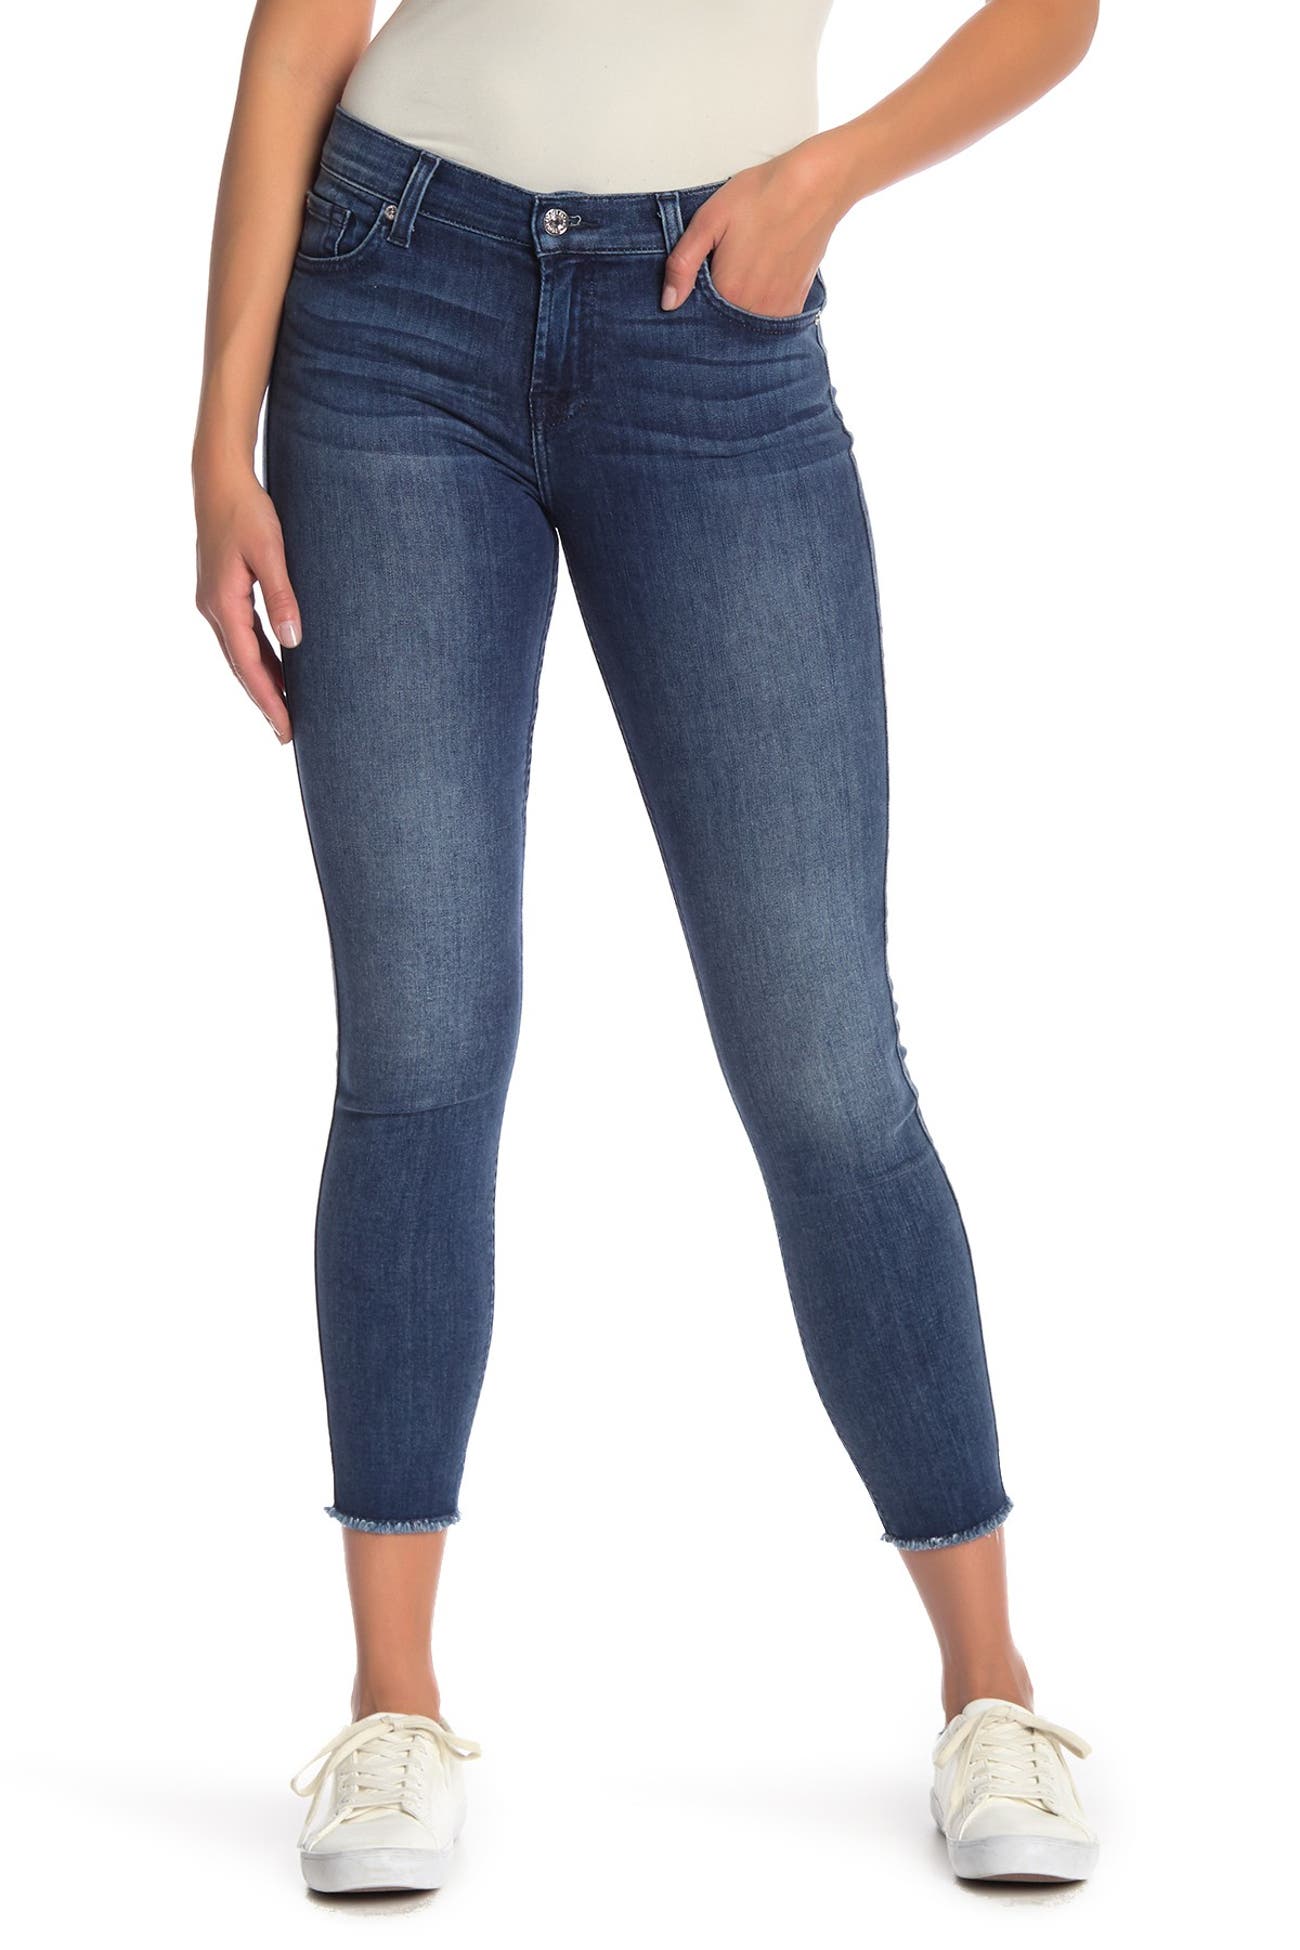 7 For All Mankind | Gwenevere Raw Hem Ankle Skinny Jeans | Nordstrom Rack